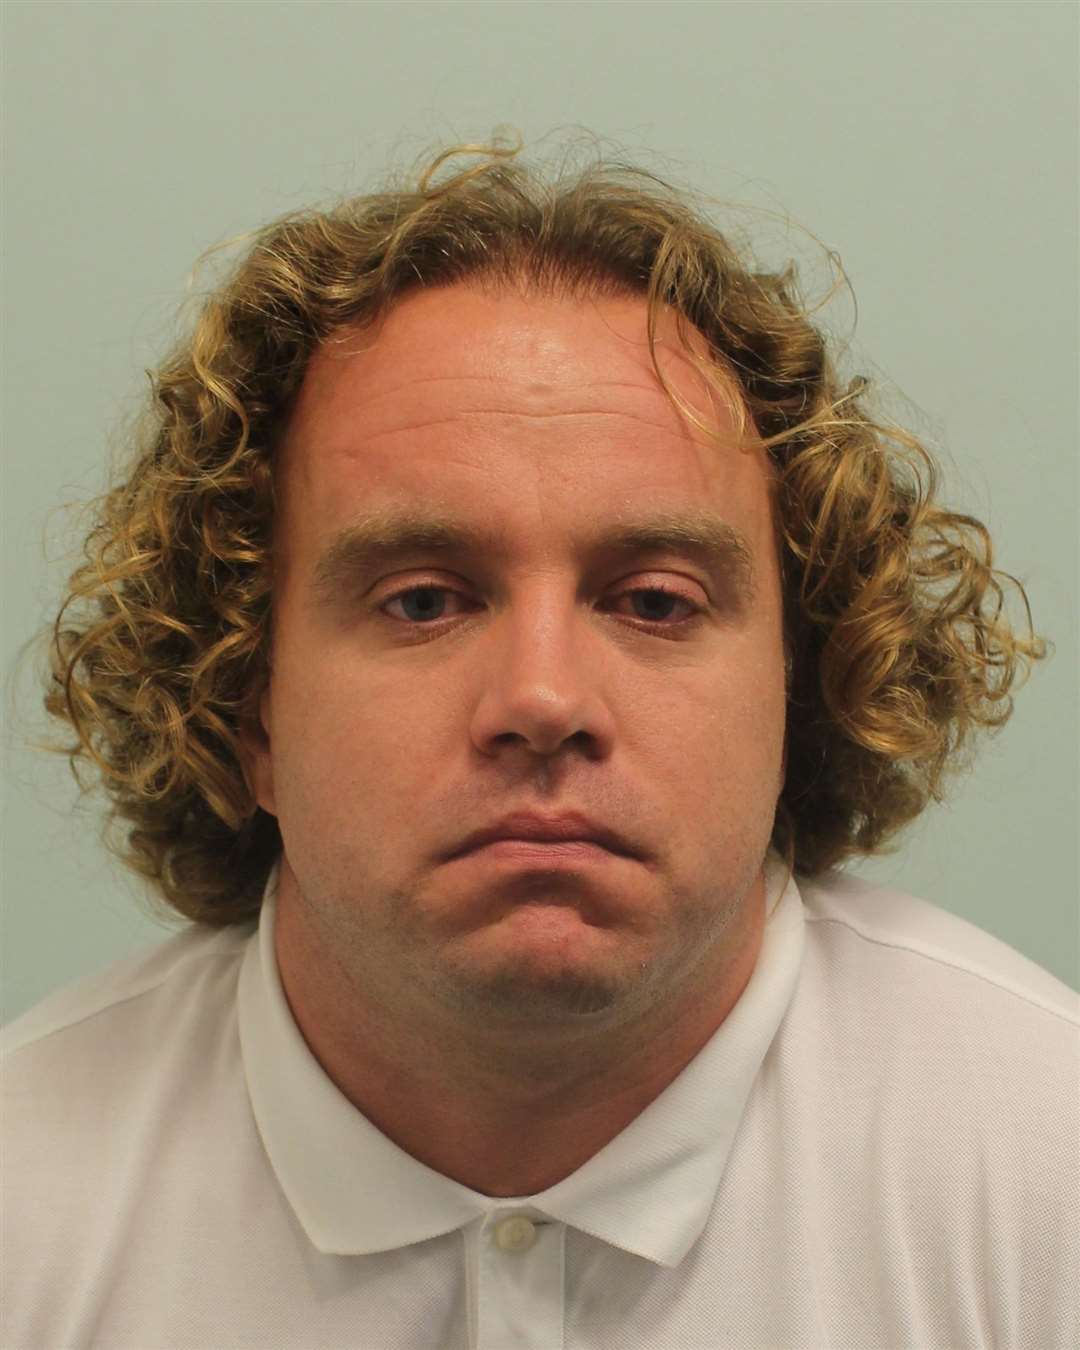 Charles Riddington was found to be living under a fake name for 10 years. Picture: Met Police